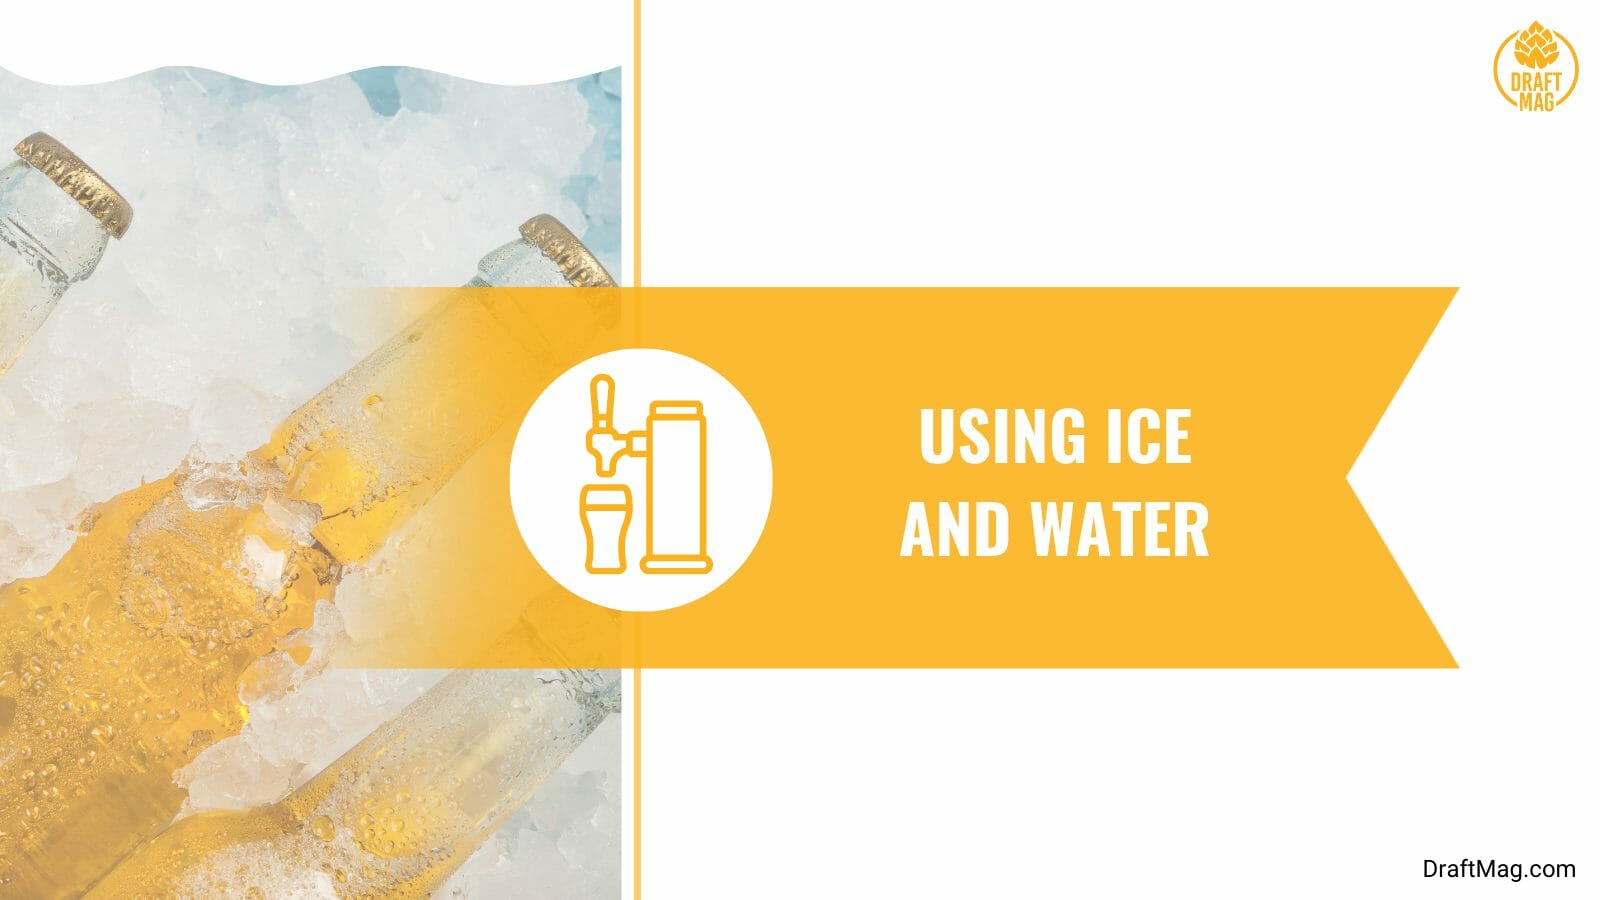 Using ice and water